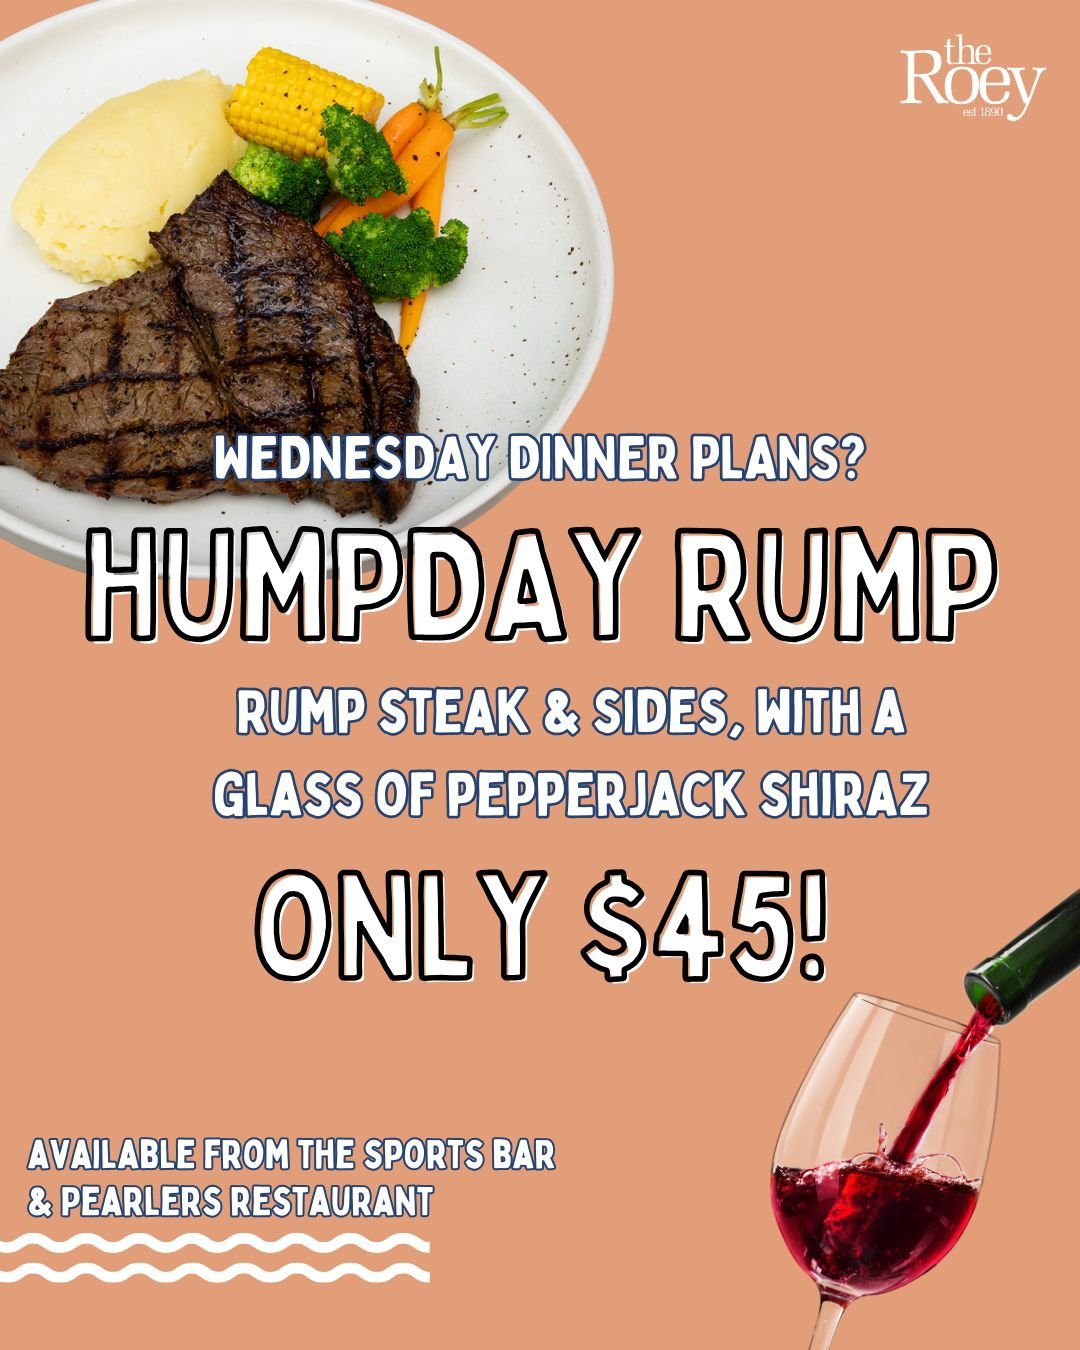 Happy Humpday Roey Fam!

Can you believe we are halfway to FriYAY?! Celebrate with our HUMPDAY RUMP SPECIAL 🥩🍷 available from Sports Bar &amp; Pearlers from 5pm

Fuel up for the rest of the week with a Rump Steak &amp; Sides, plus a glass of Pepper